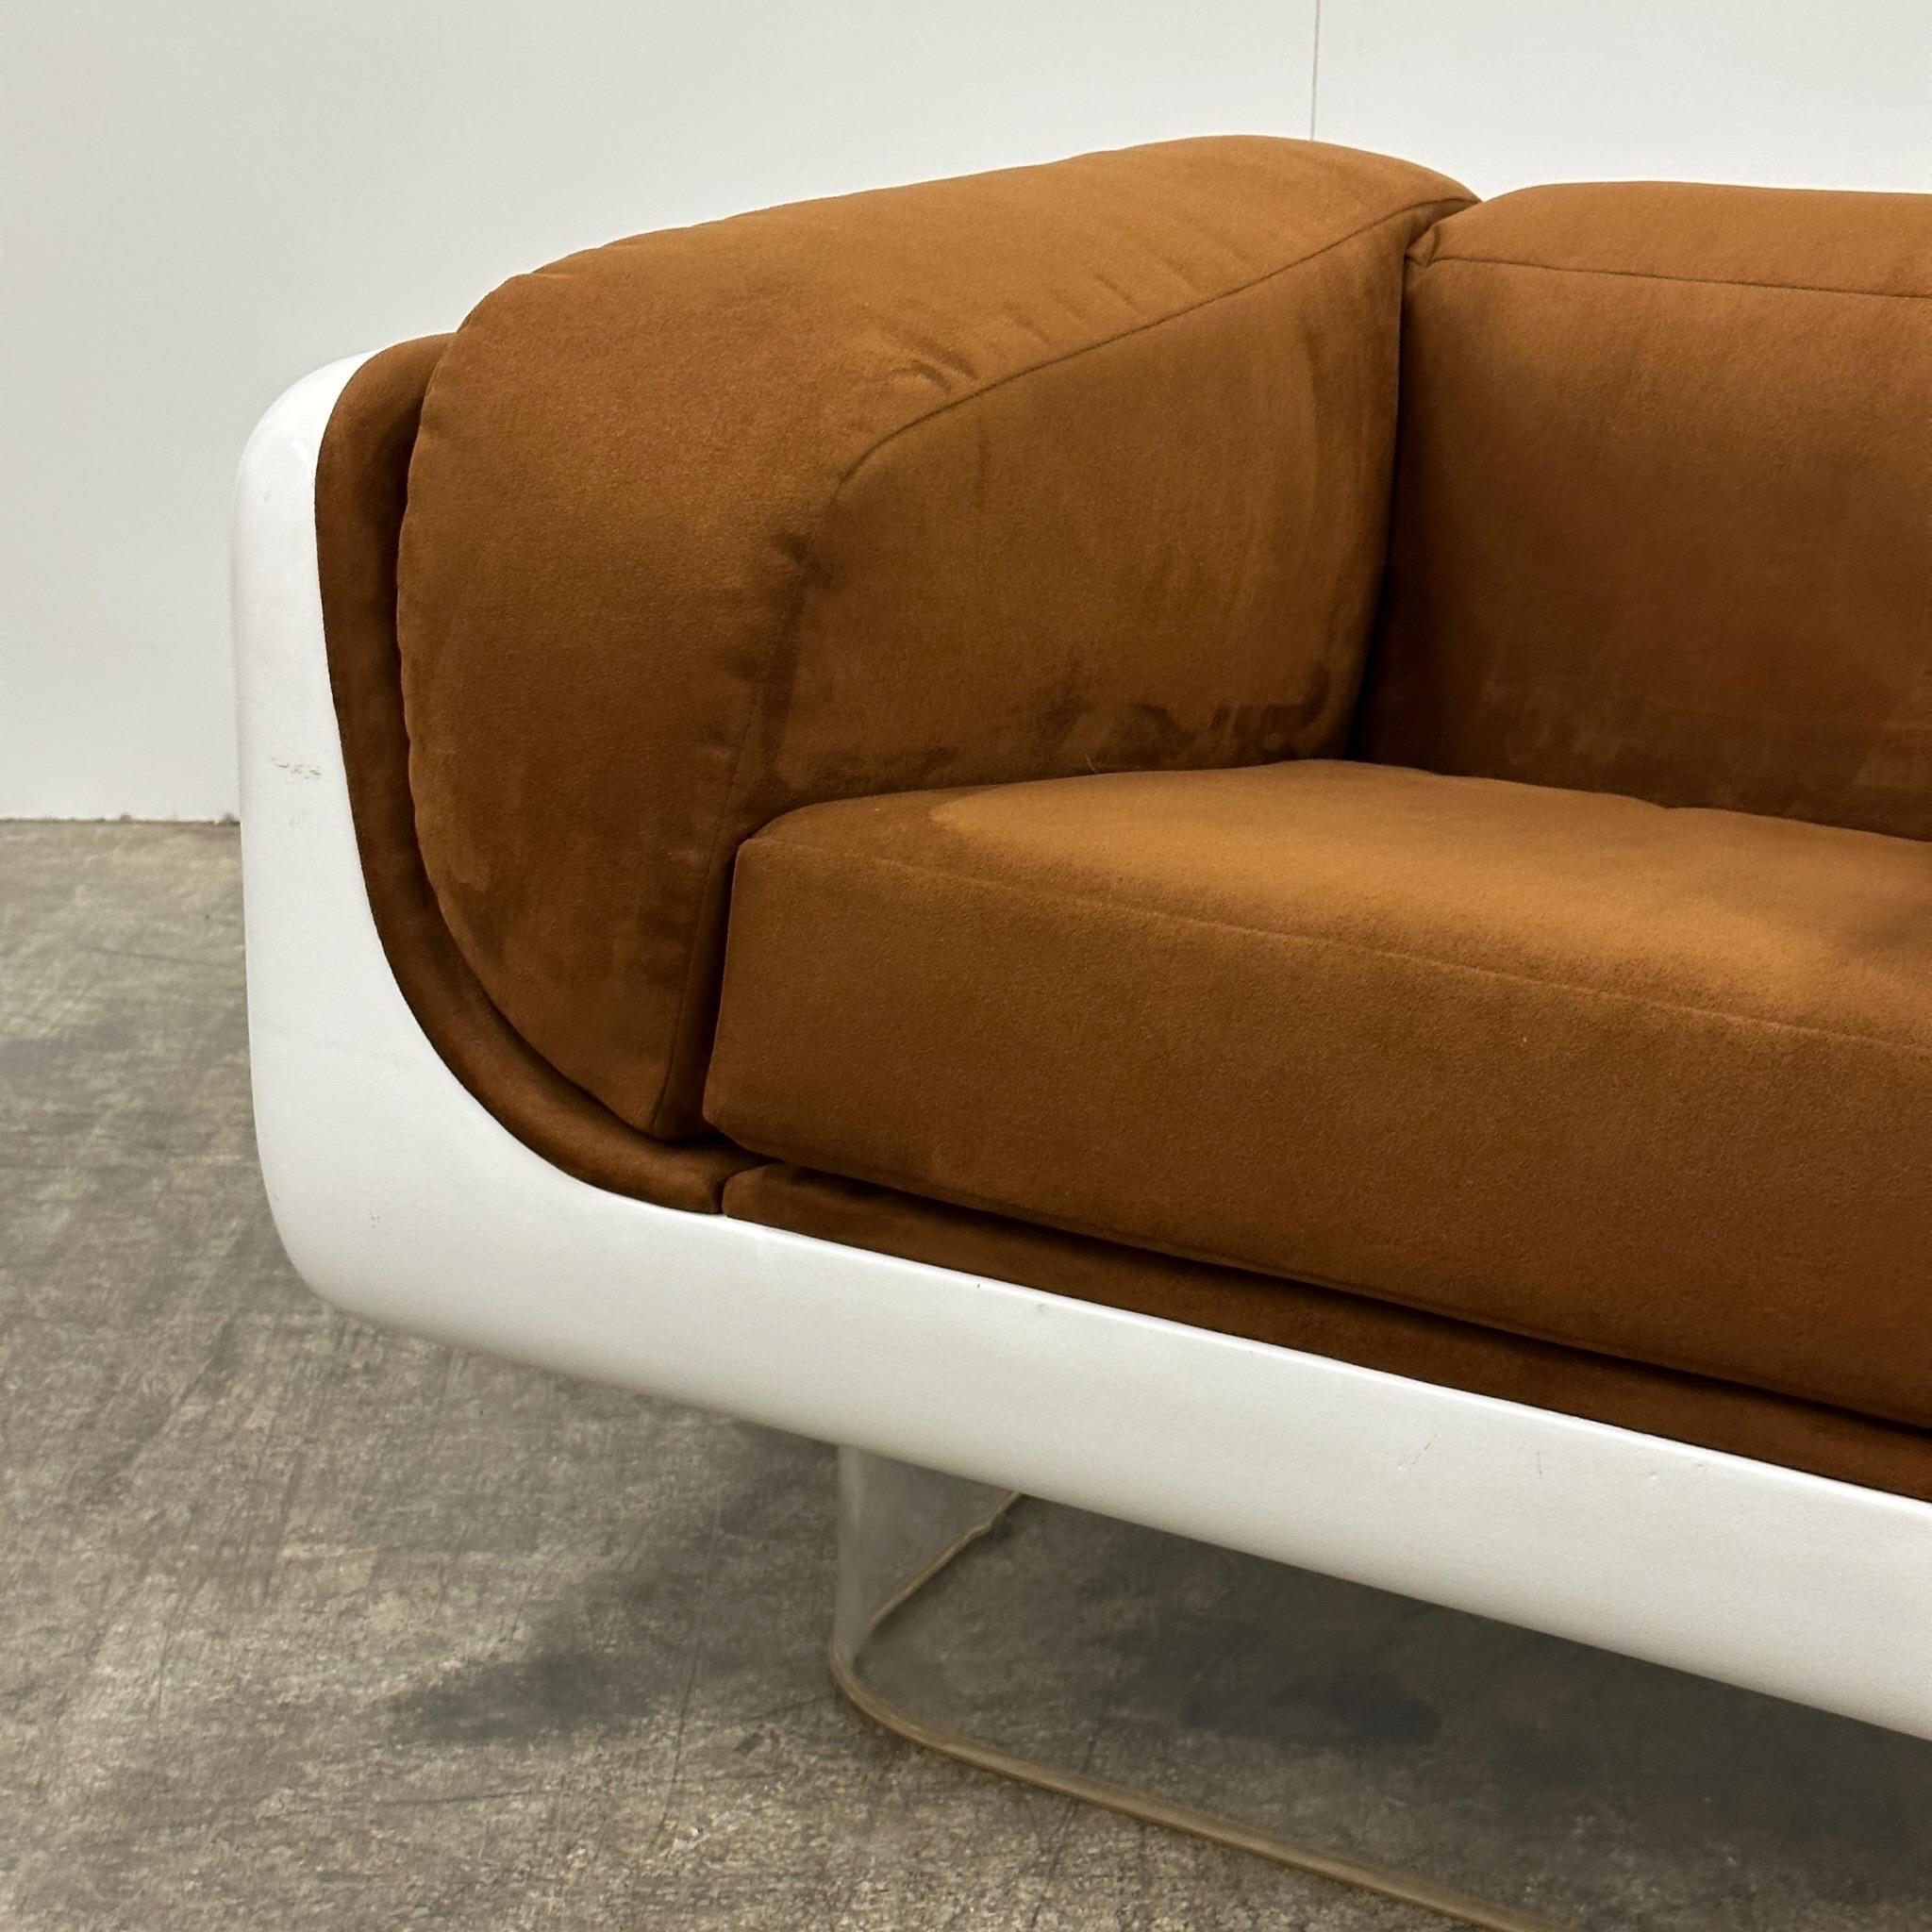 Made in the USA. High gloss white finish on a lucite base. Reupholstered in brown suede. Extremely rare.